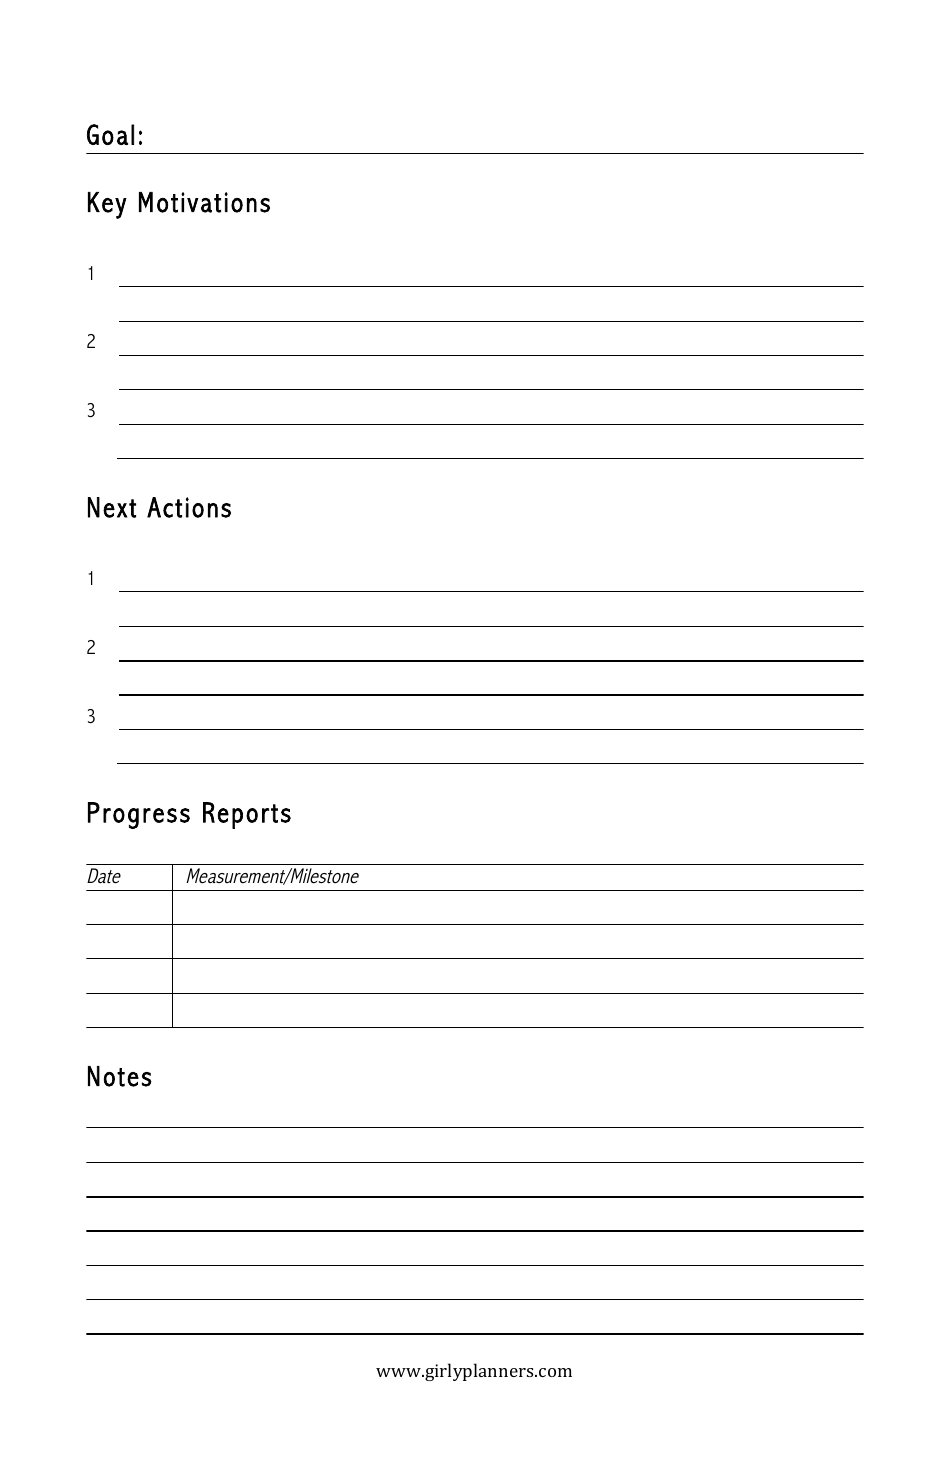 Goal Tracking Sheet Template - Four Points